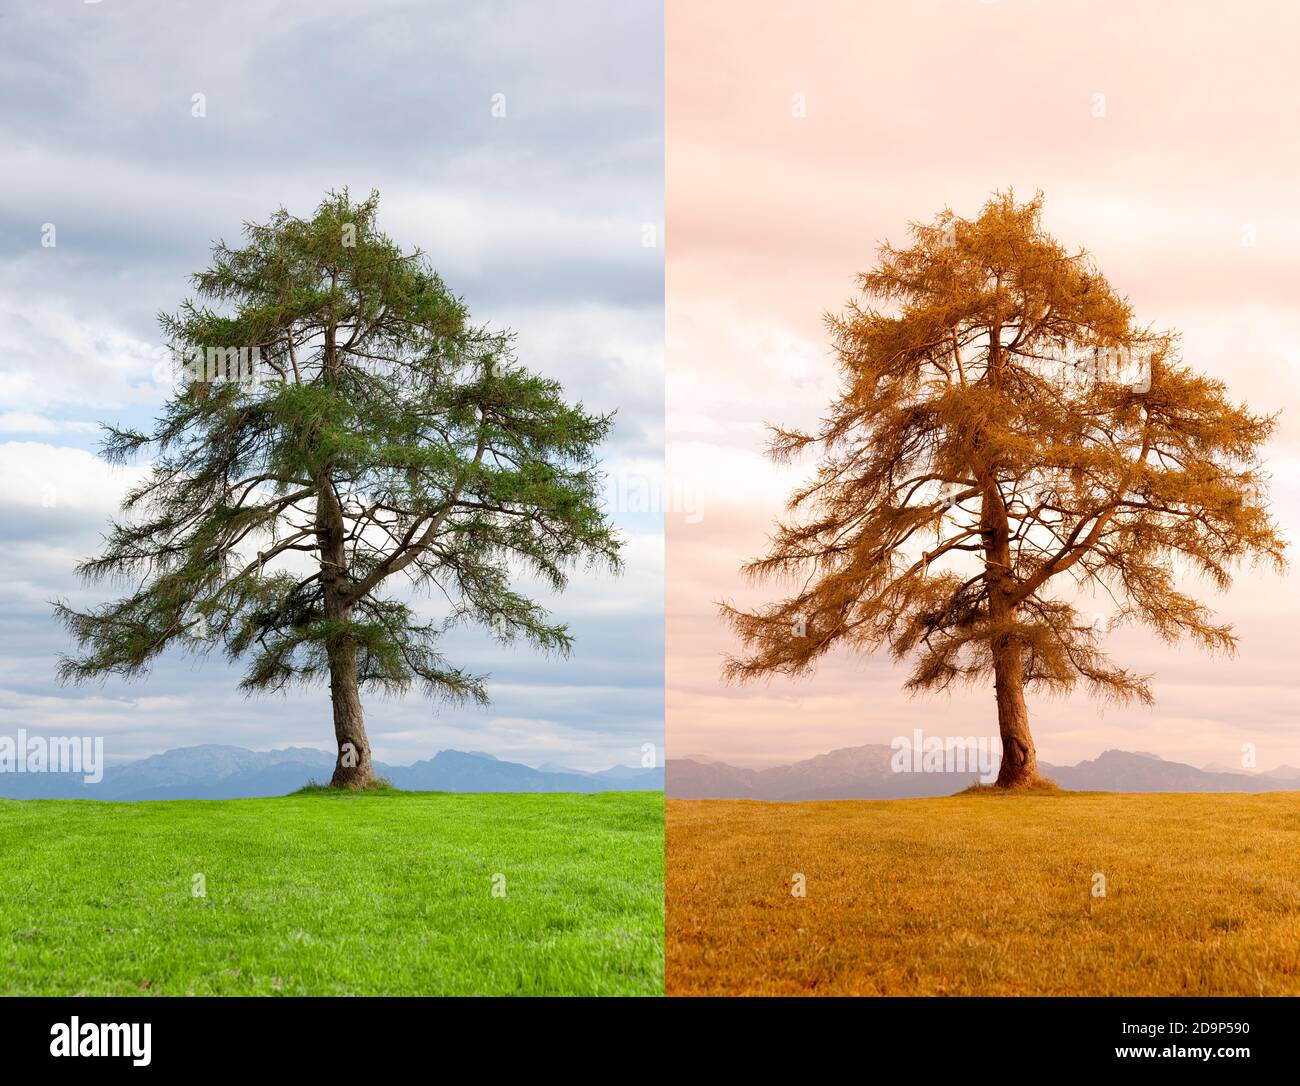 Tree in the change of seasons from summer to autumn Stock Photo